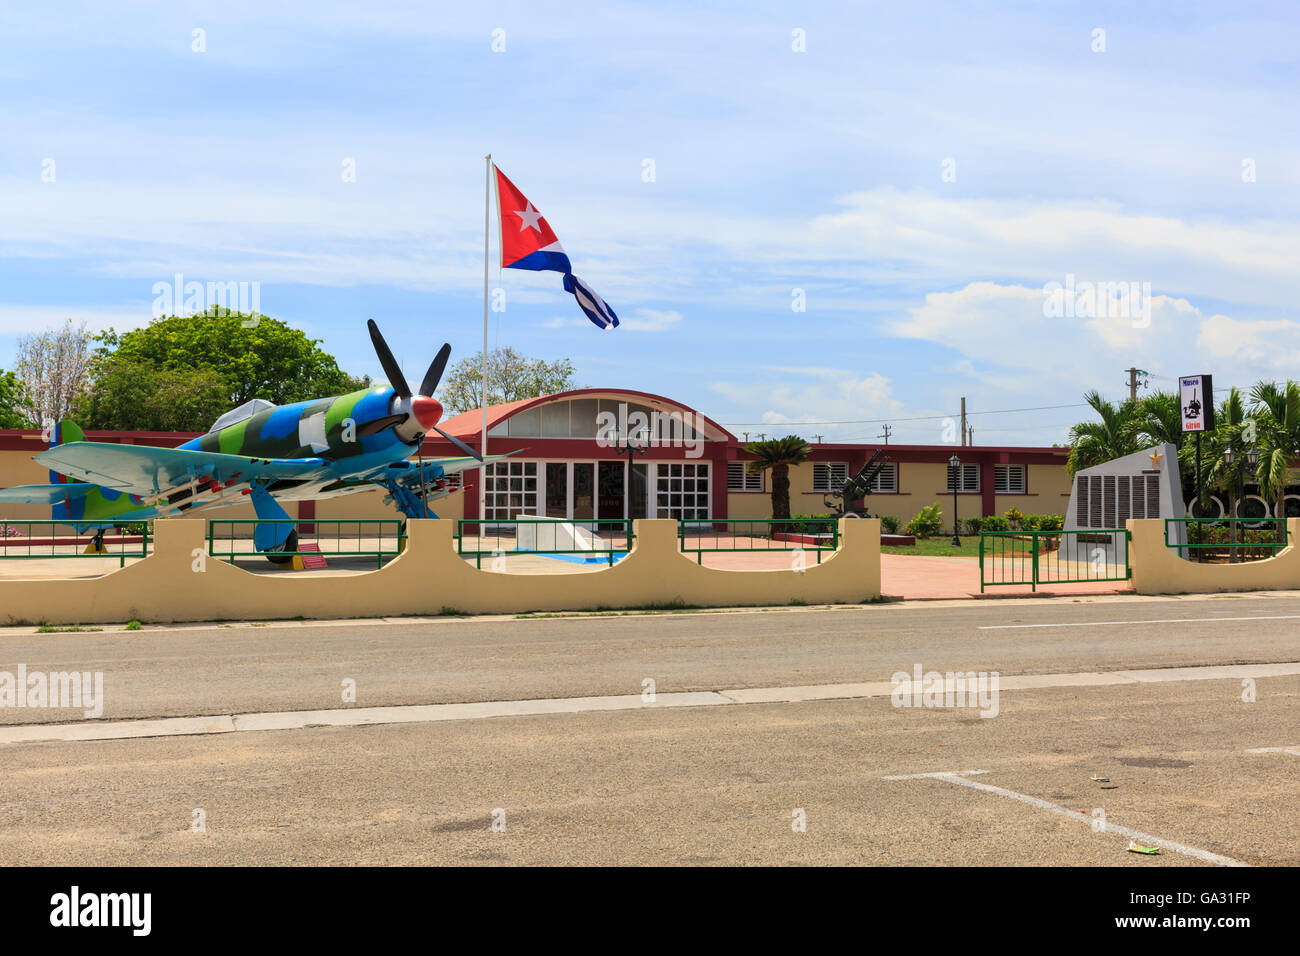 Museo Playa Girón, Bay of Pigs Museum dedicated to the invasion and battle, with Hawker Fury fighter plane, Cuba Stock Photo